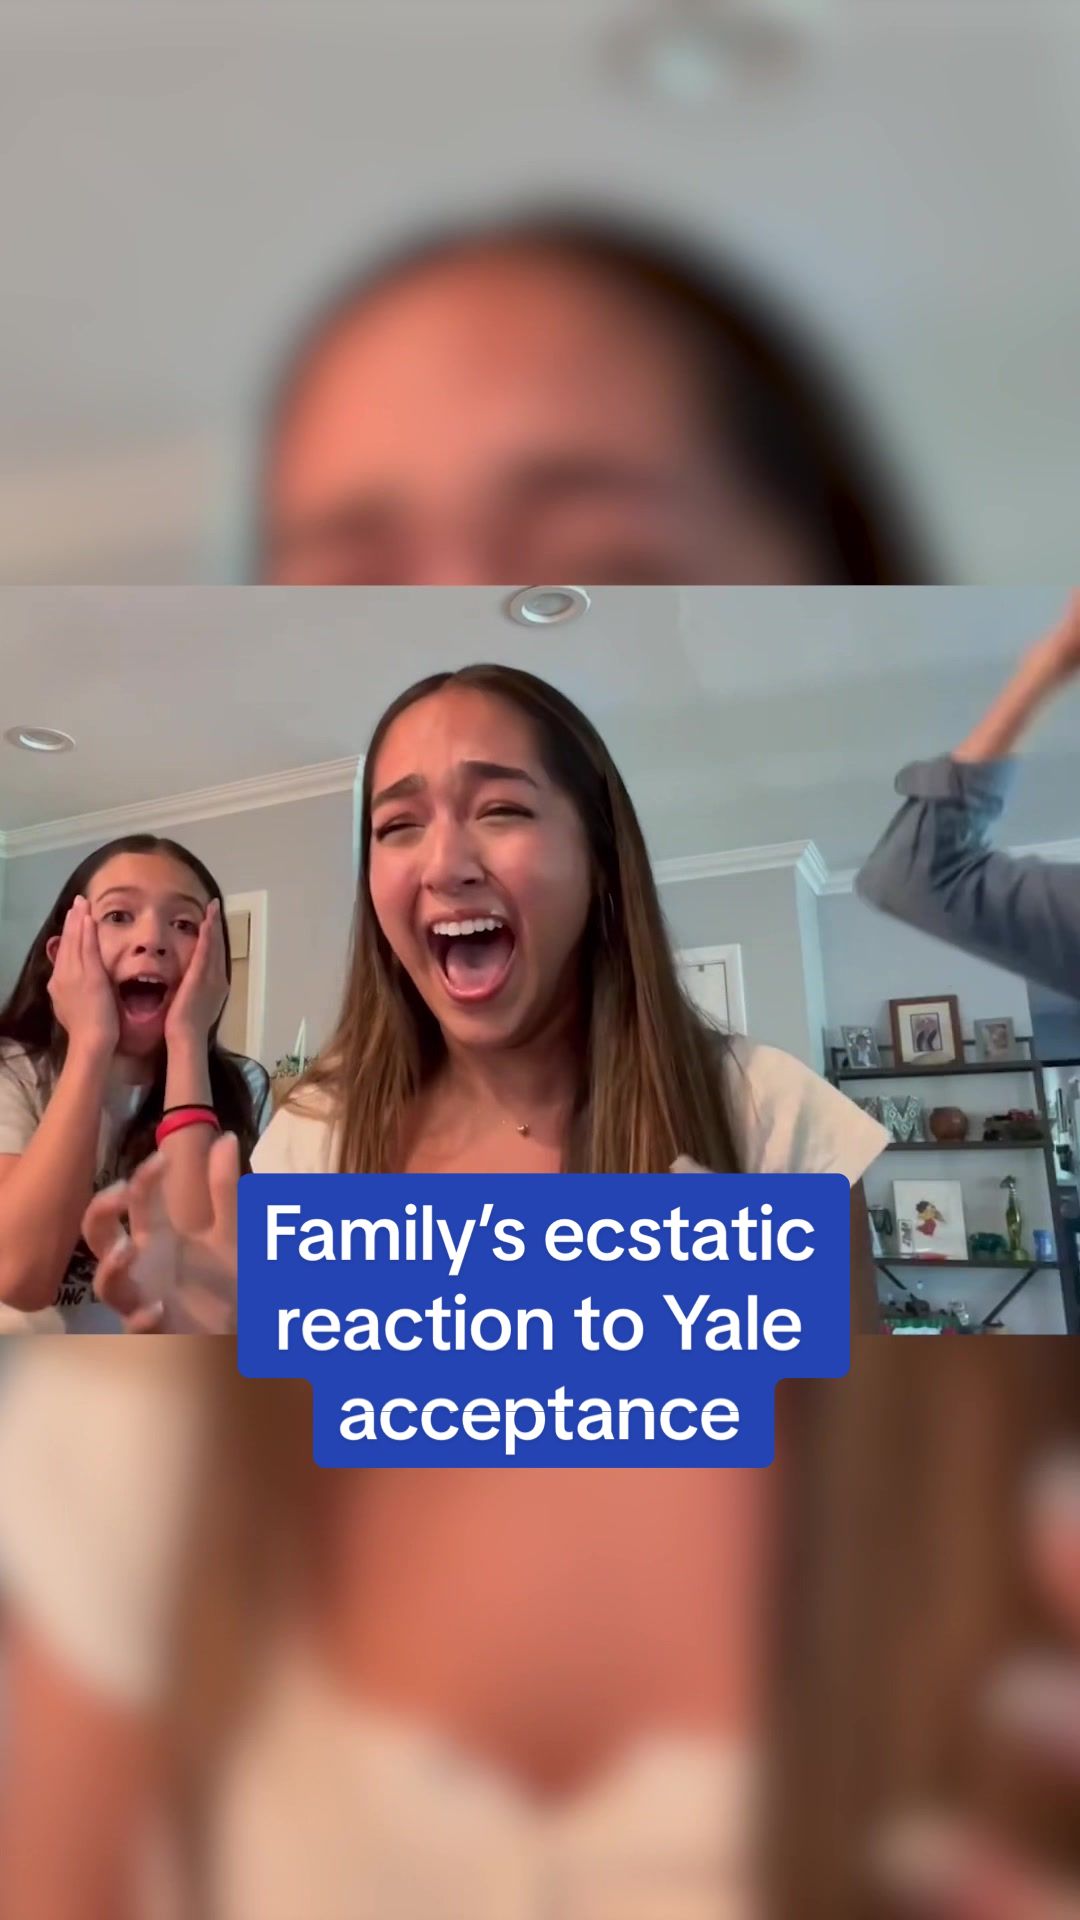 High school student Metztli Lopez and her family were THRILLED upon discovering she’d been accepted to Yale University. After receiving the exciting news, Metztli, her sister Maya, and her mom Claudia jumped for joy and shared a group hug.  🎥 Metztli Lopez via Storyful  #collegeacceptance #college #yale #viral #heartwarming